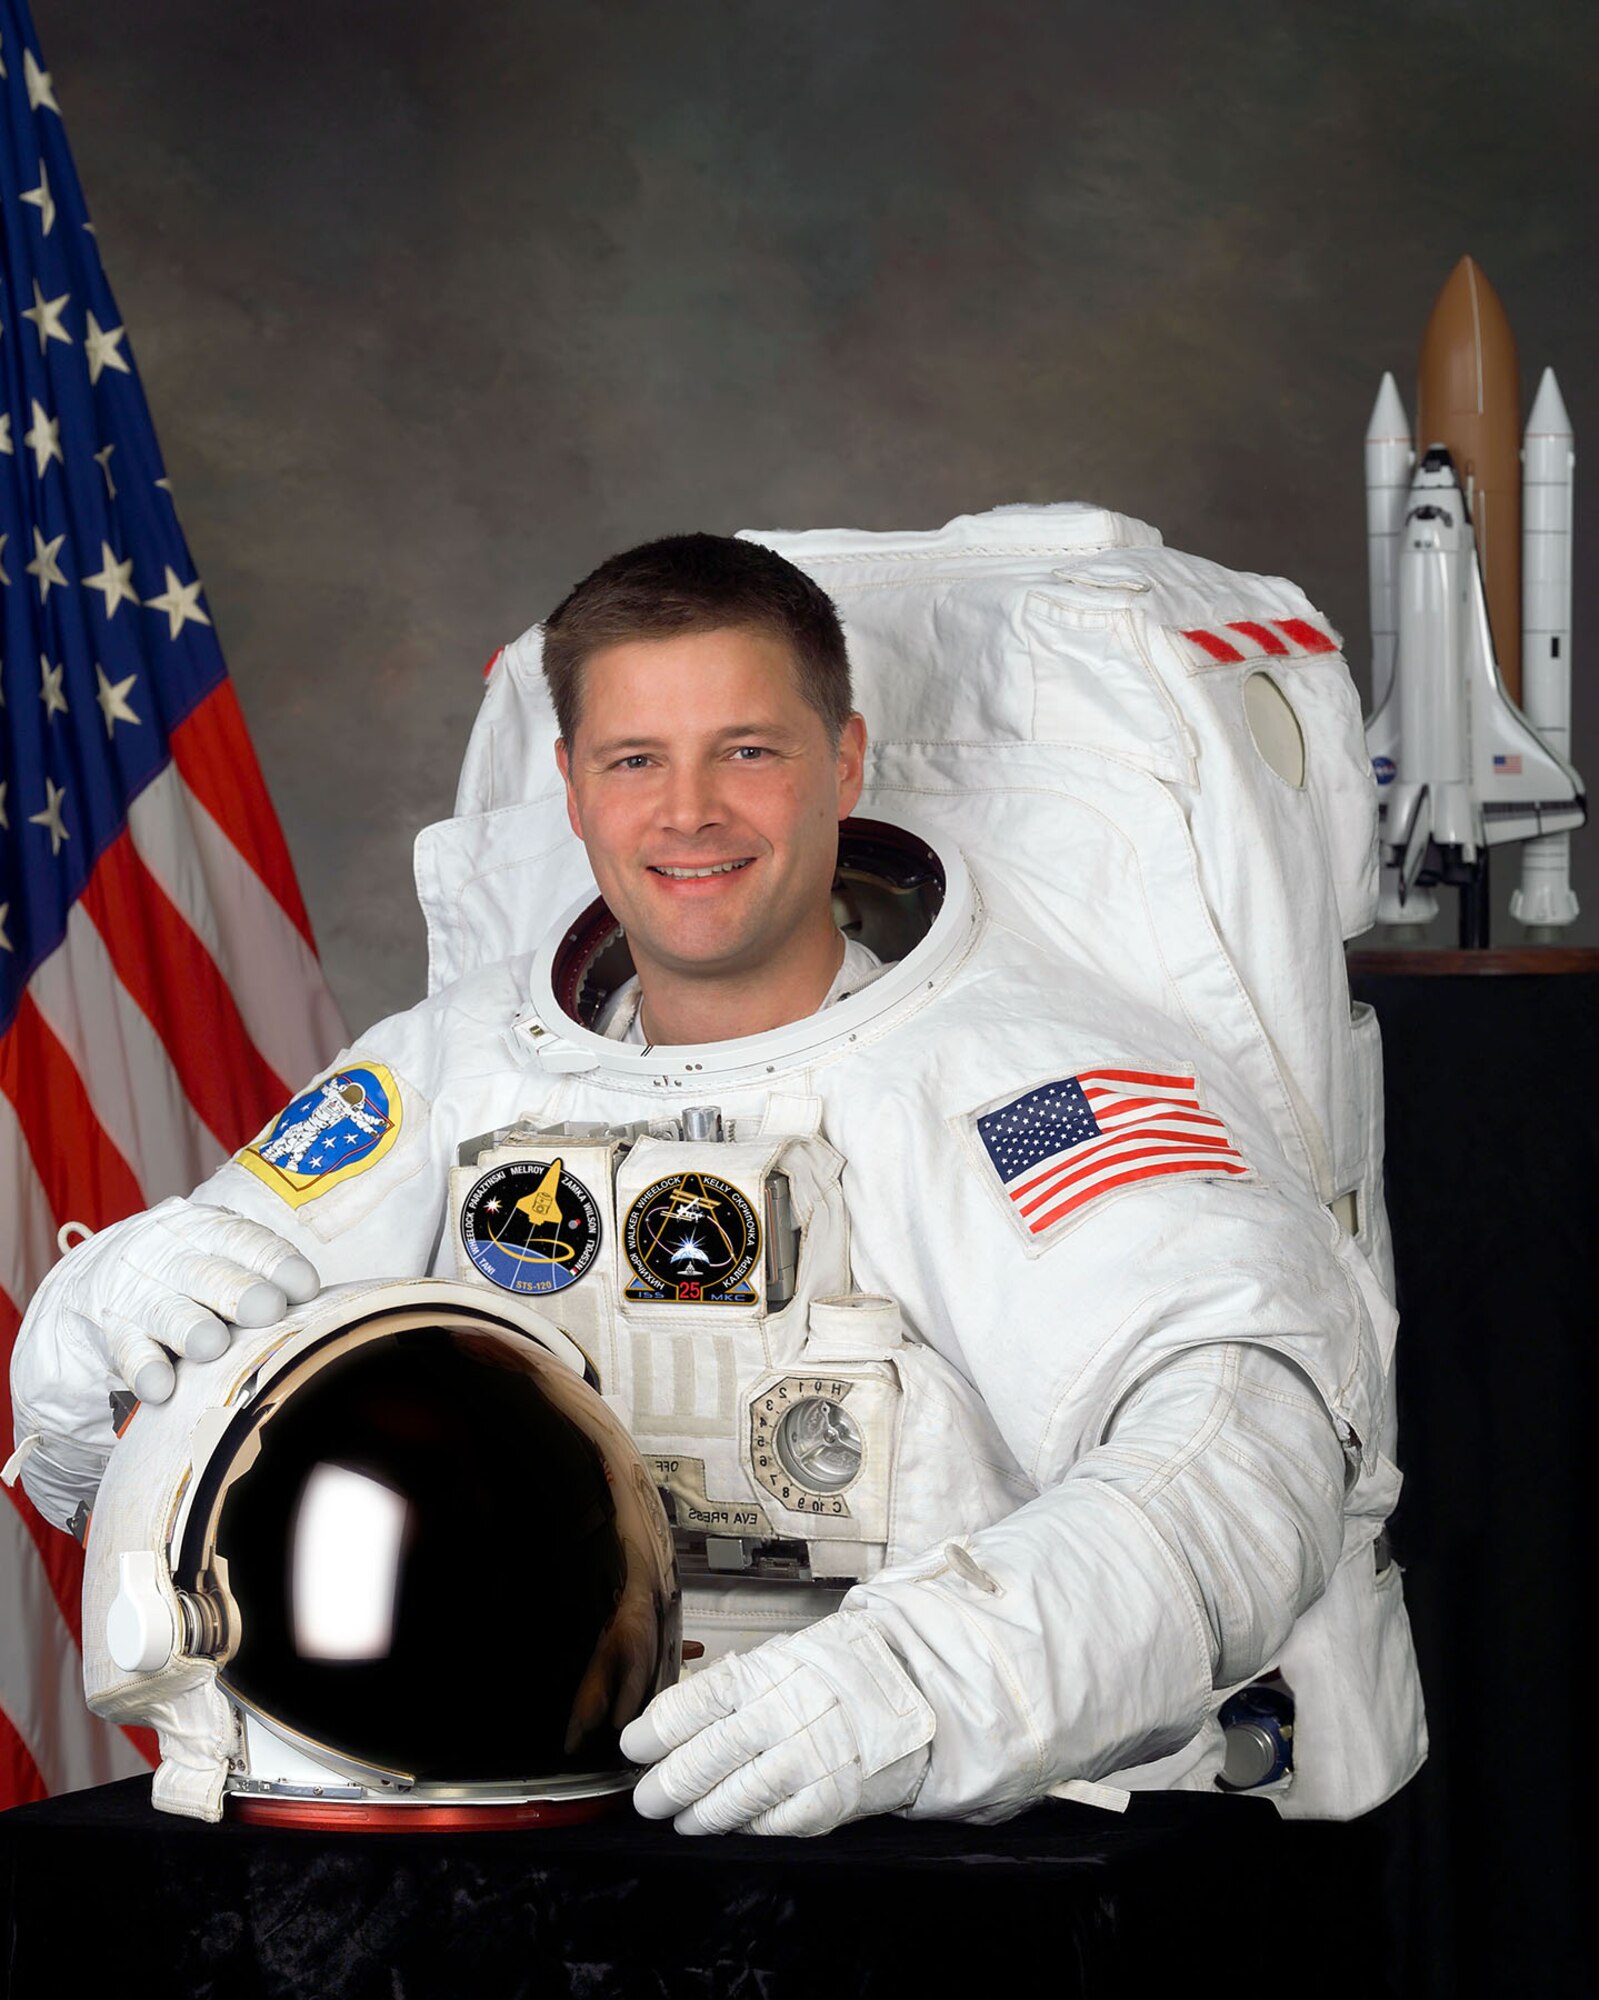 Astronaut and Army Colonel Douglas H. Wheelock, who spent nearly six months on the International Space Station in 2010, will sign autographs at 10 a.m. on Saturday, May 17, 2014, during Space Fest at the National Museum of the U.S. Air Force. He also will speak at 1 p.m. that day in the museum’s Carney Auditorium. (Photo courtesy of NASA)